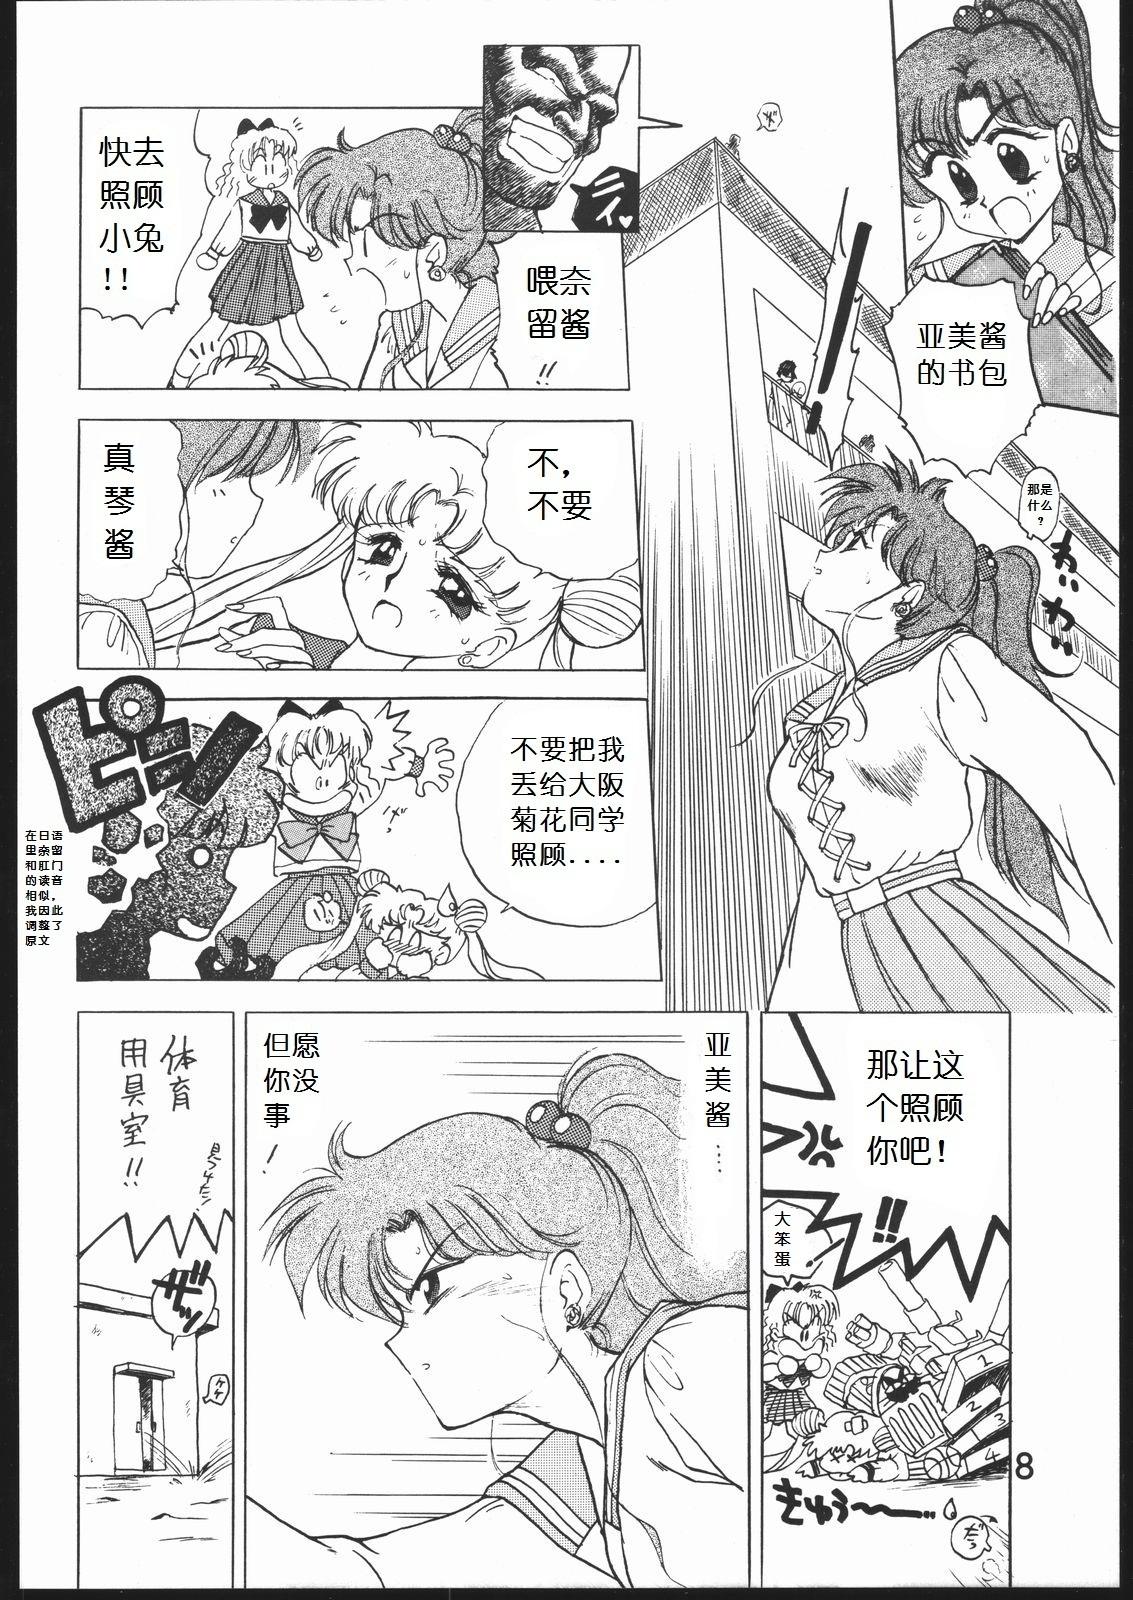 Abuse Submission Jupiter Plus - Sailor moon Gayfuck - Page 10